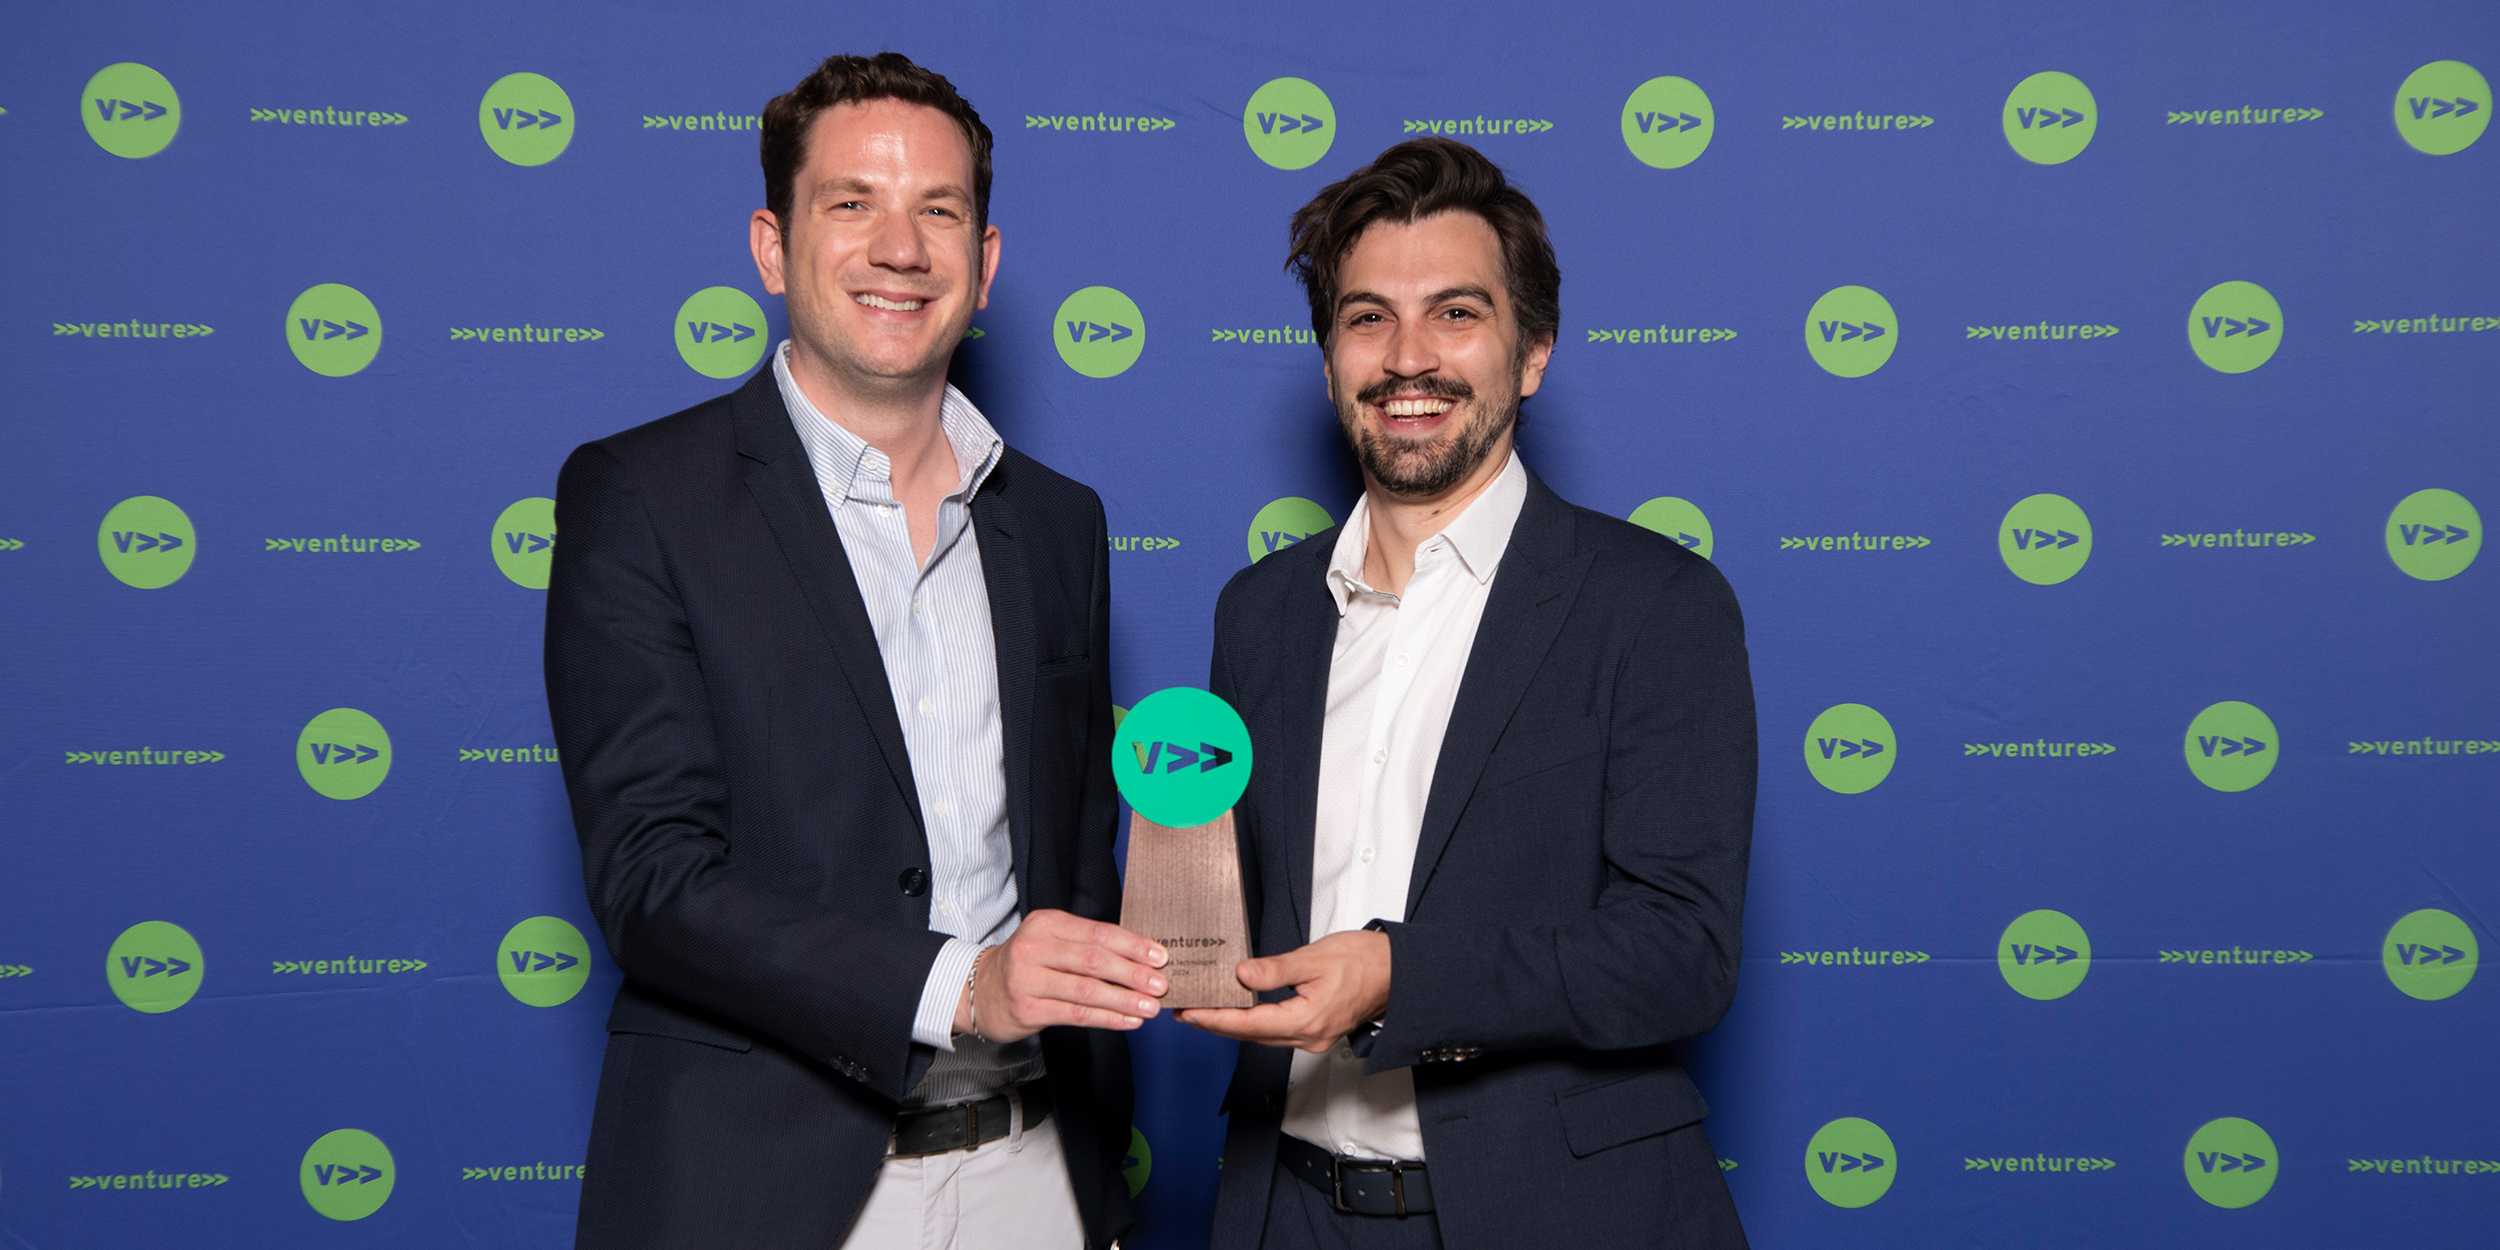 Winning photograph of the entrepreneurs behind Climada, the winners holding the prize in their hands